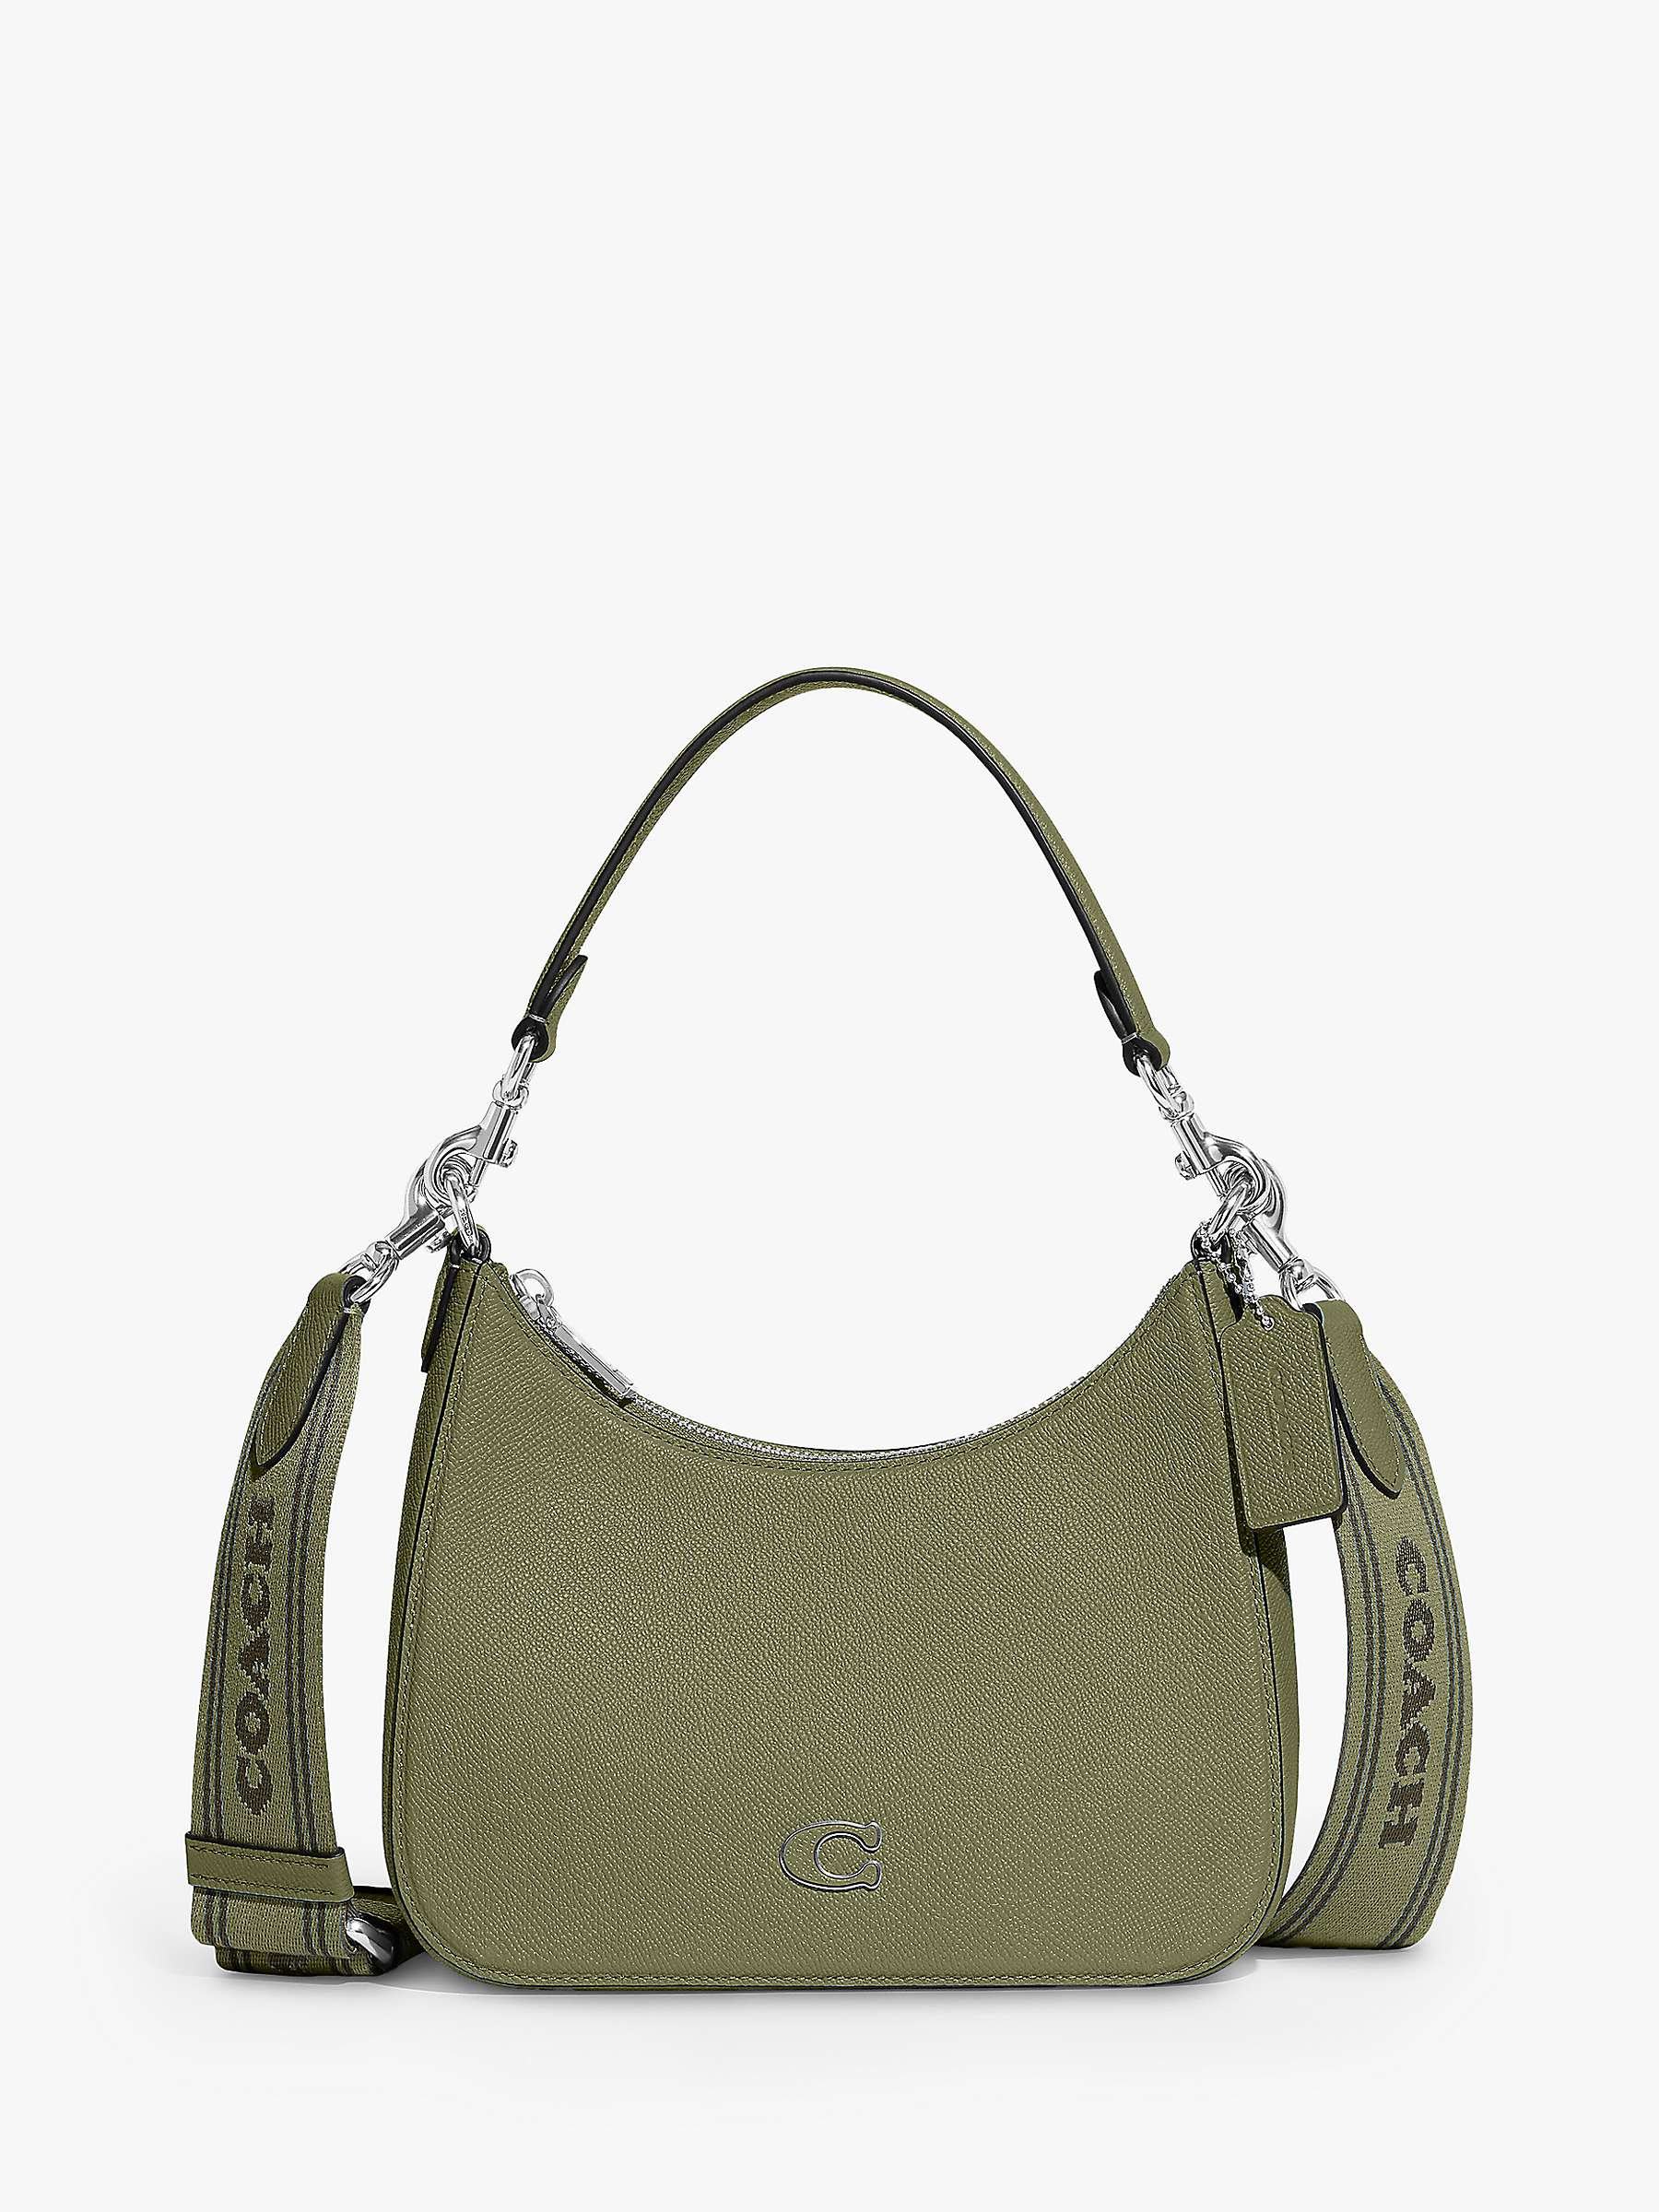 Buy Coach Leather Hobo Cross Body Bag, Moss Online at johnlewis.com